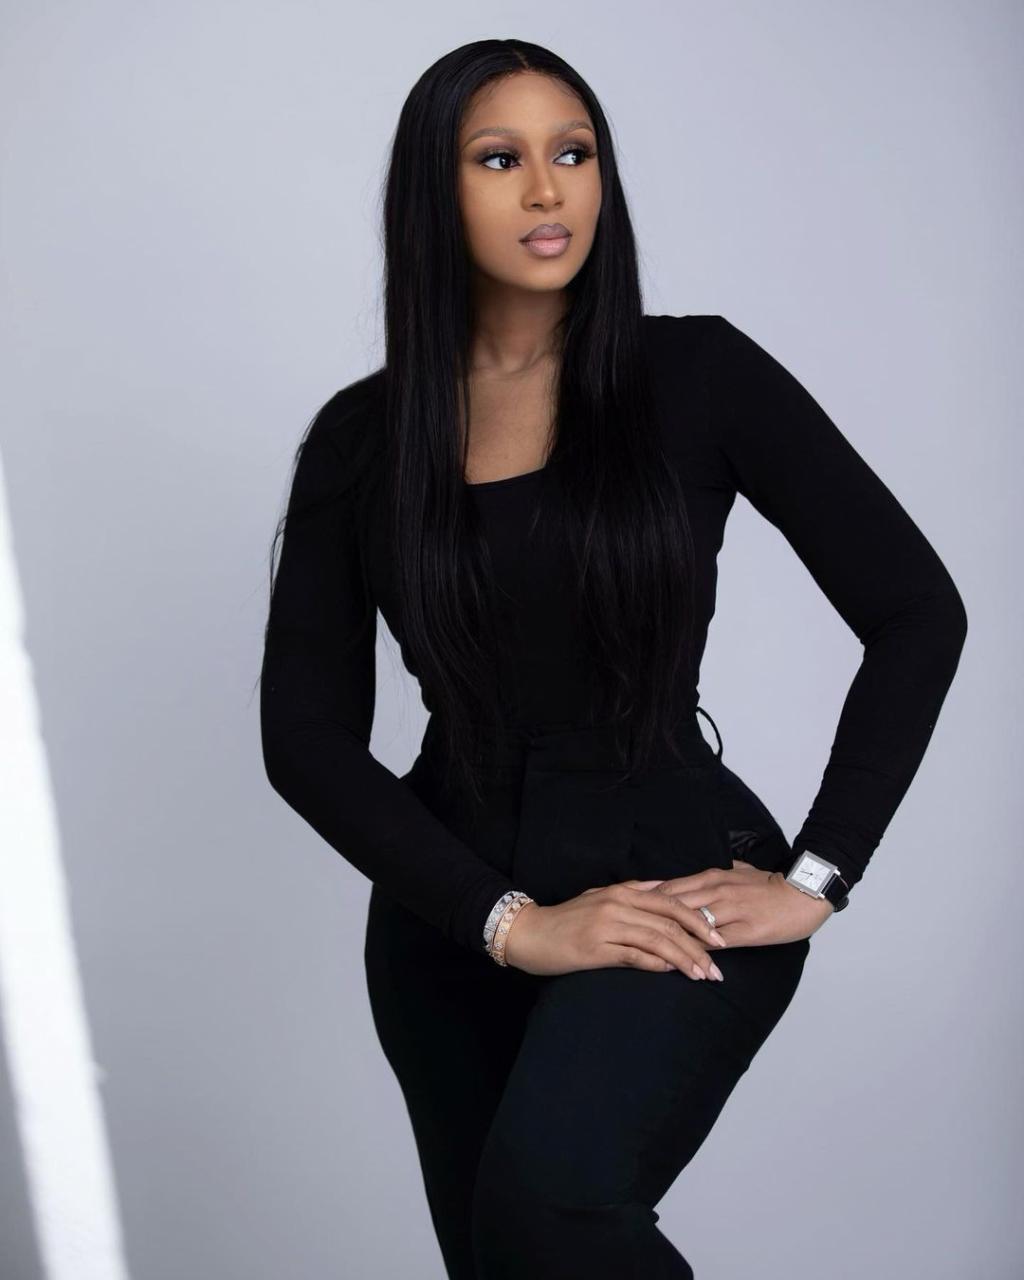 Daughter of Bauchi Governor, Fatima Zara showcases her curves in stunning new photos 